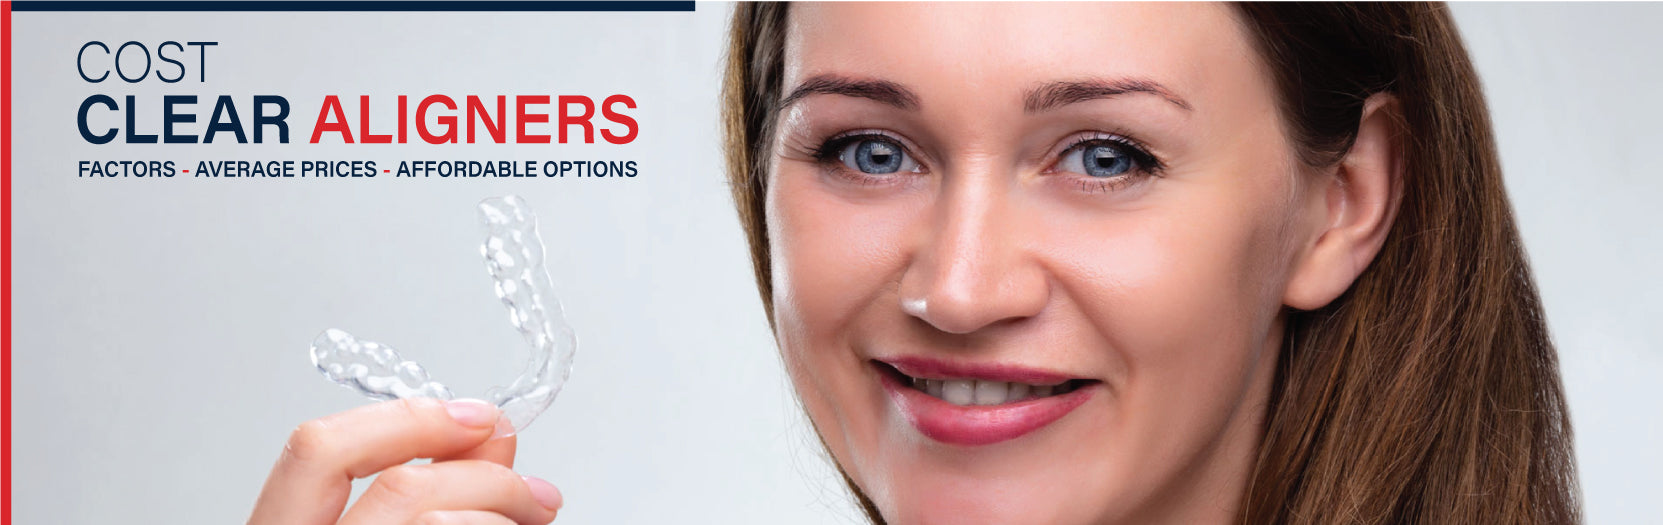 Clear Aligners Cost: Factors, Average Prices, and Affordable Options - DDP Elite USA